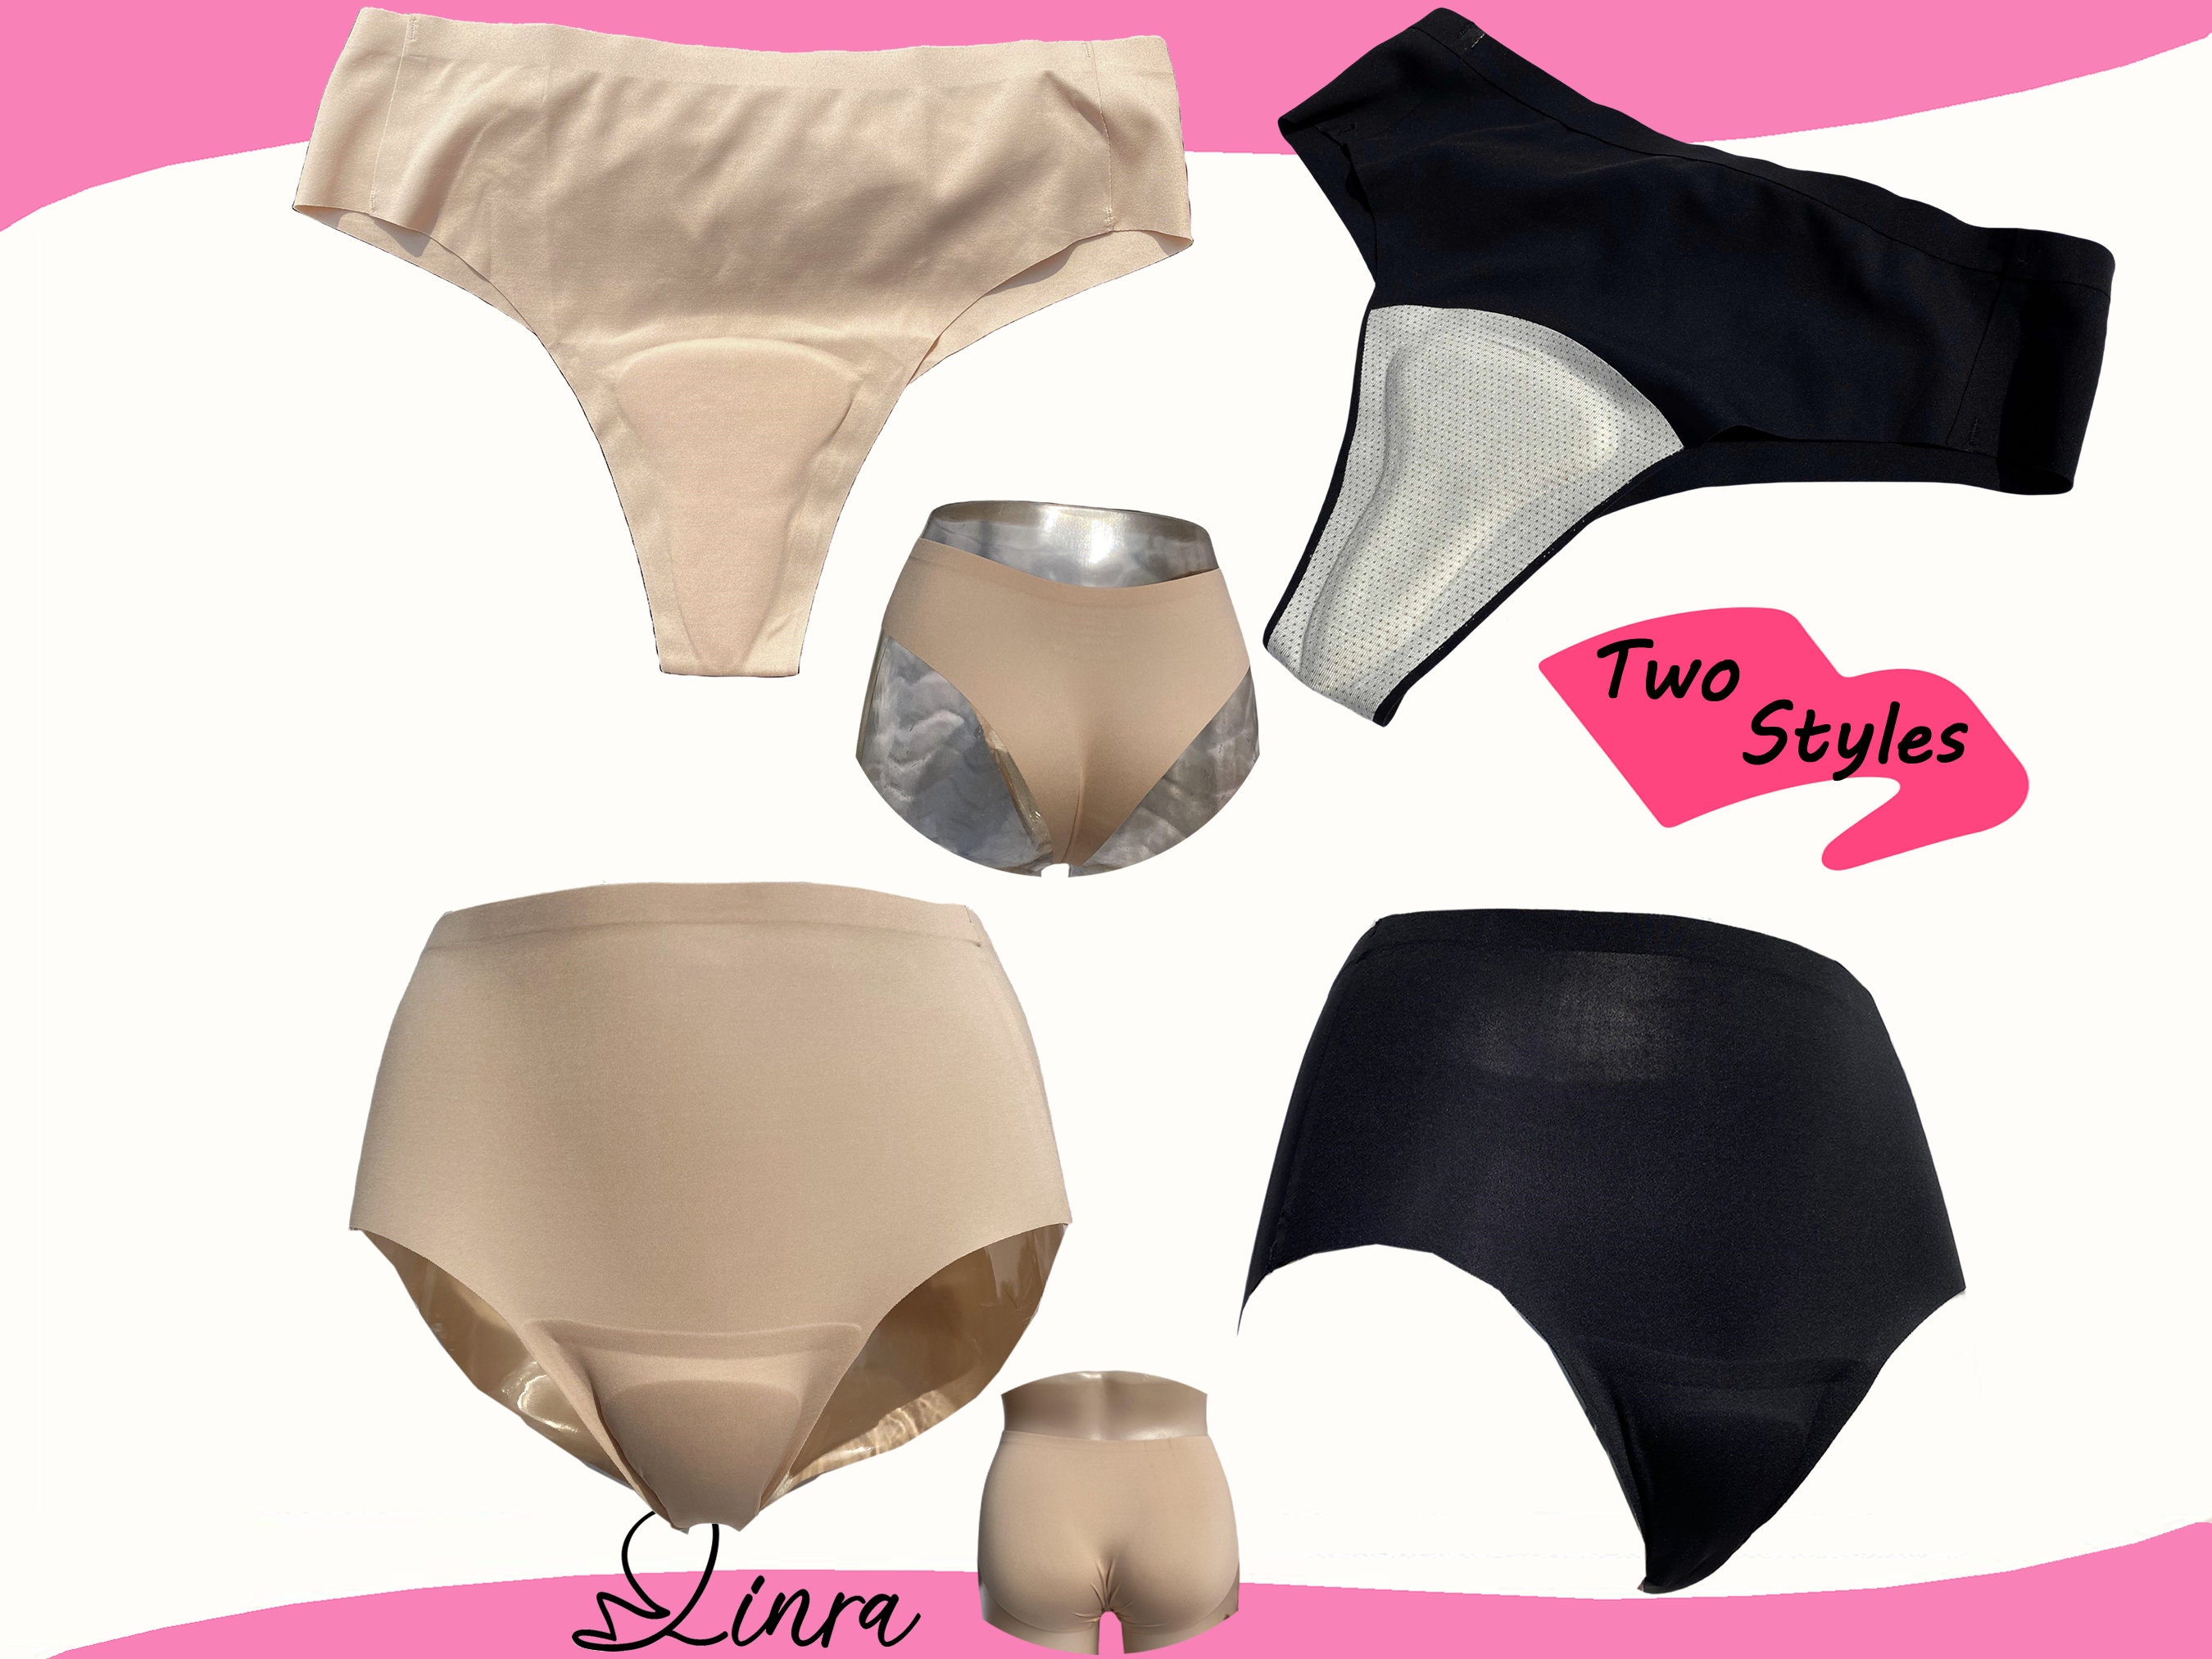 LINRA Avoid Camel Toe Proof Thong Camel Toe Concealer Pad Panty Invisible  Guard for Women Bikini Brief Underwear,2 Styles 